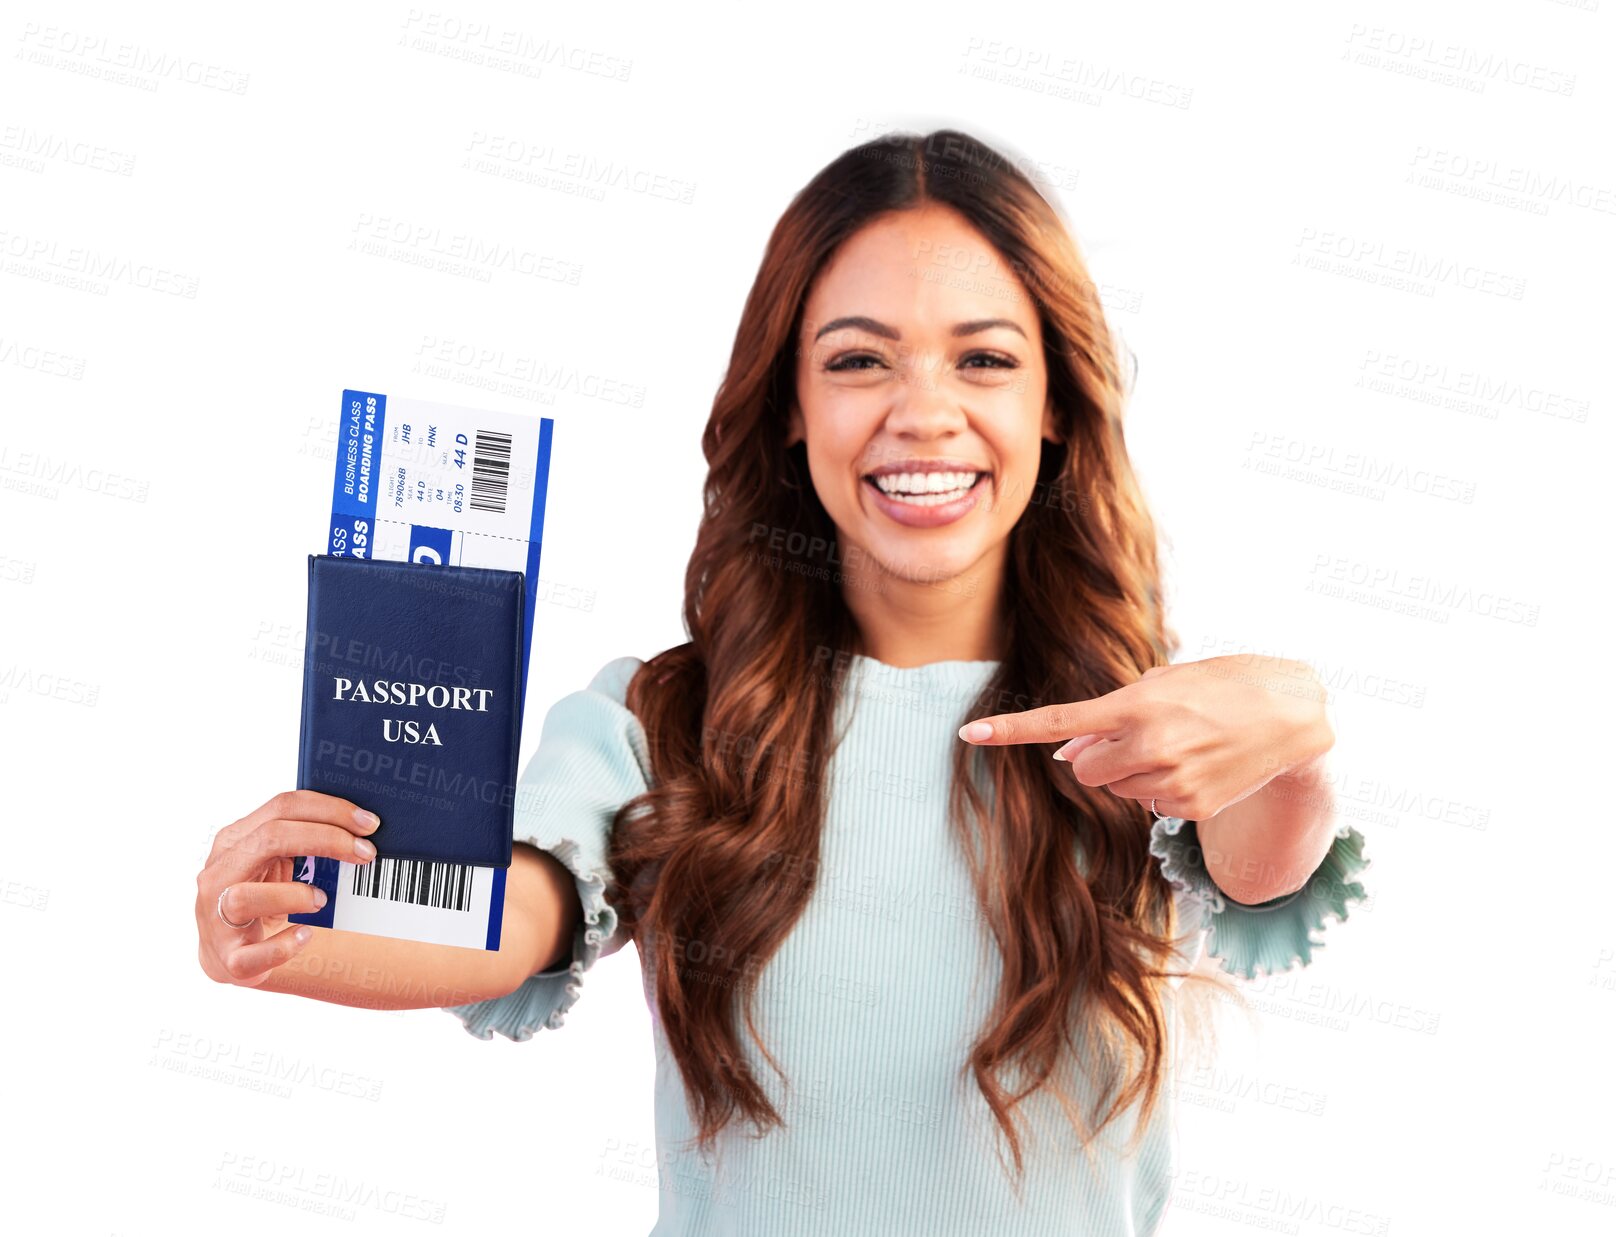 Buy stock photo Happy woman, portrait and pointing to USA passport with  travel ticket isolated on a transparent PNG background. Excited female person smile with boarding pass or flight documents for vacation trip